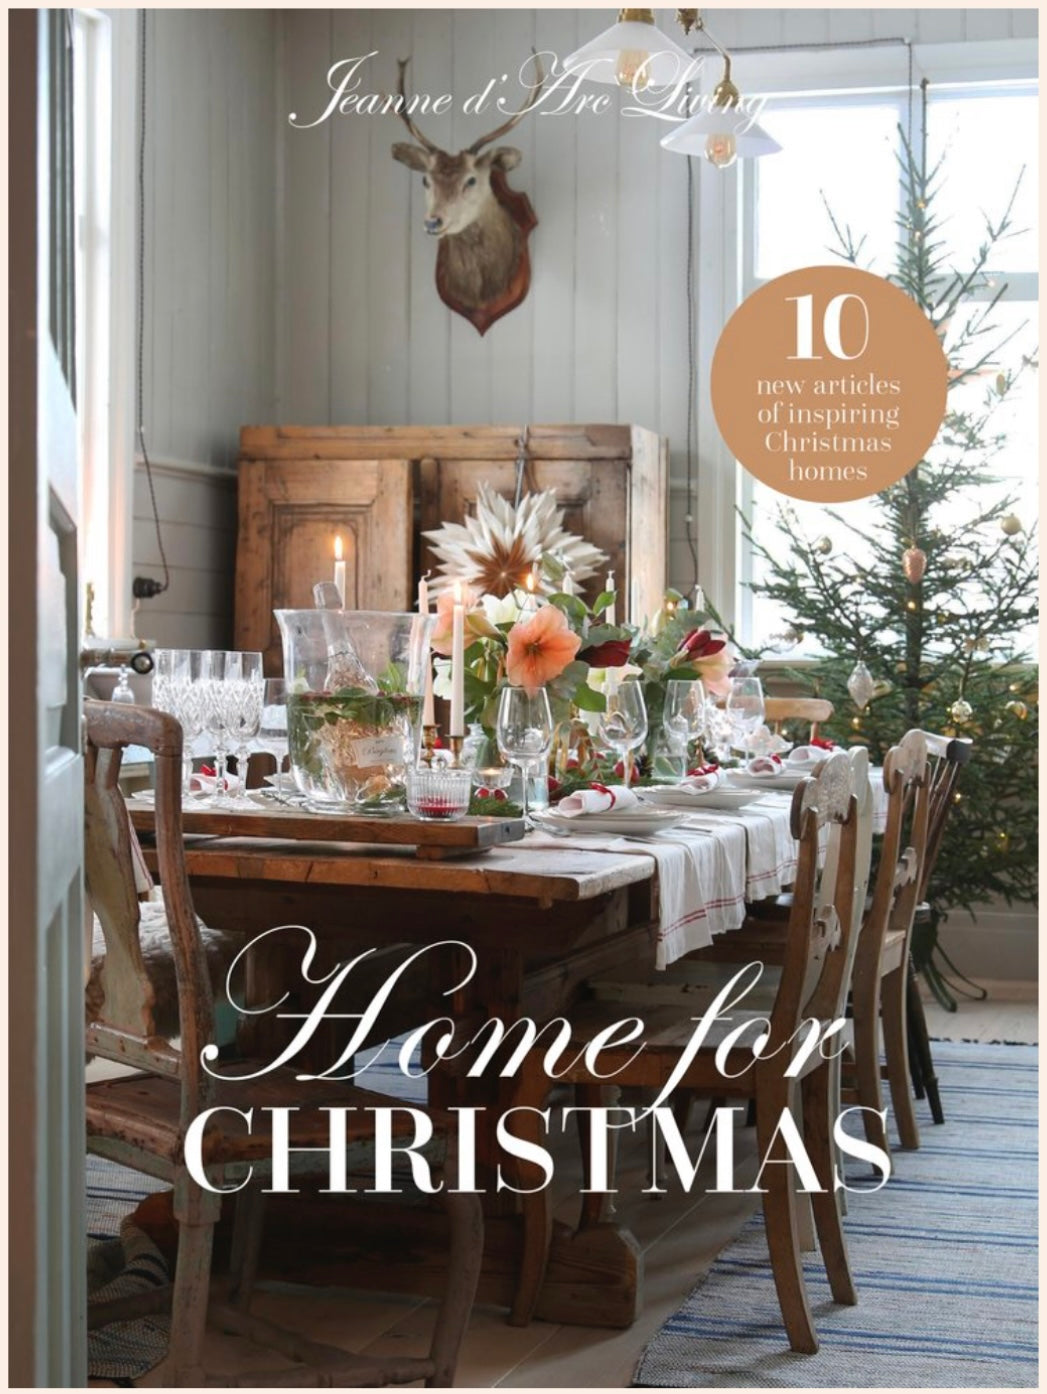 Jeanne d’Arc Living Magazine –  Home for Christmas 2023 edition